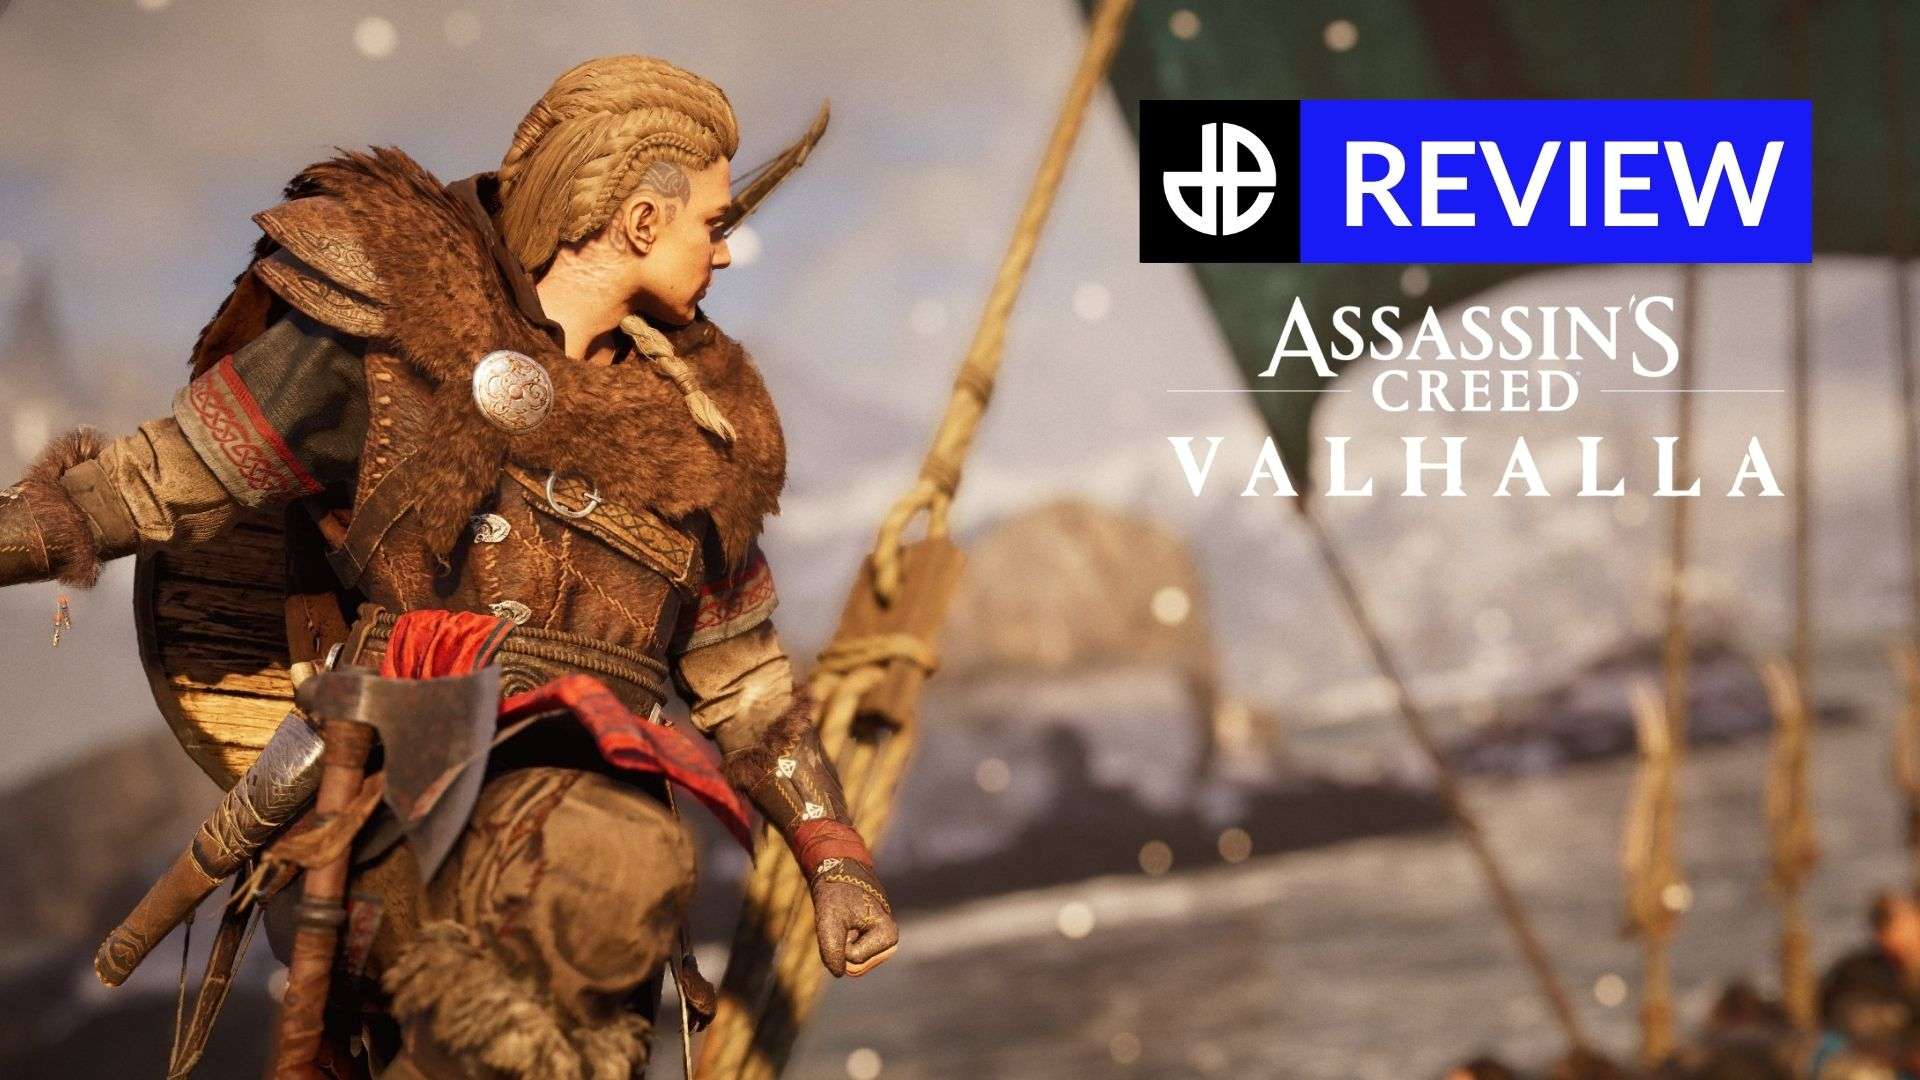 Assassin's Creed Valhalla review image